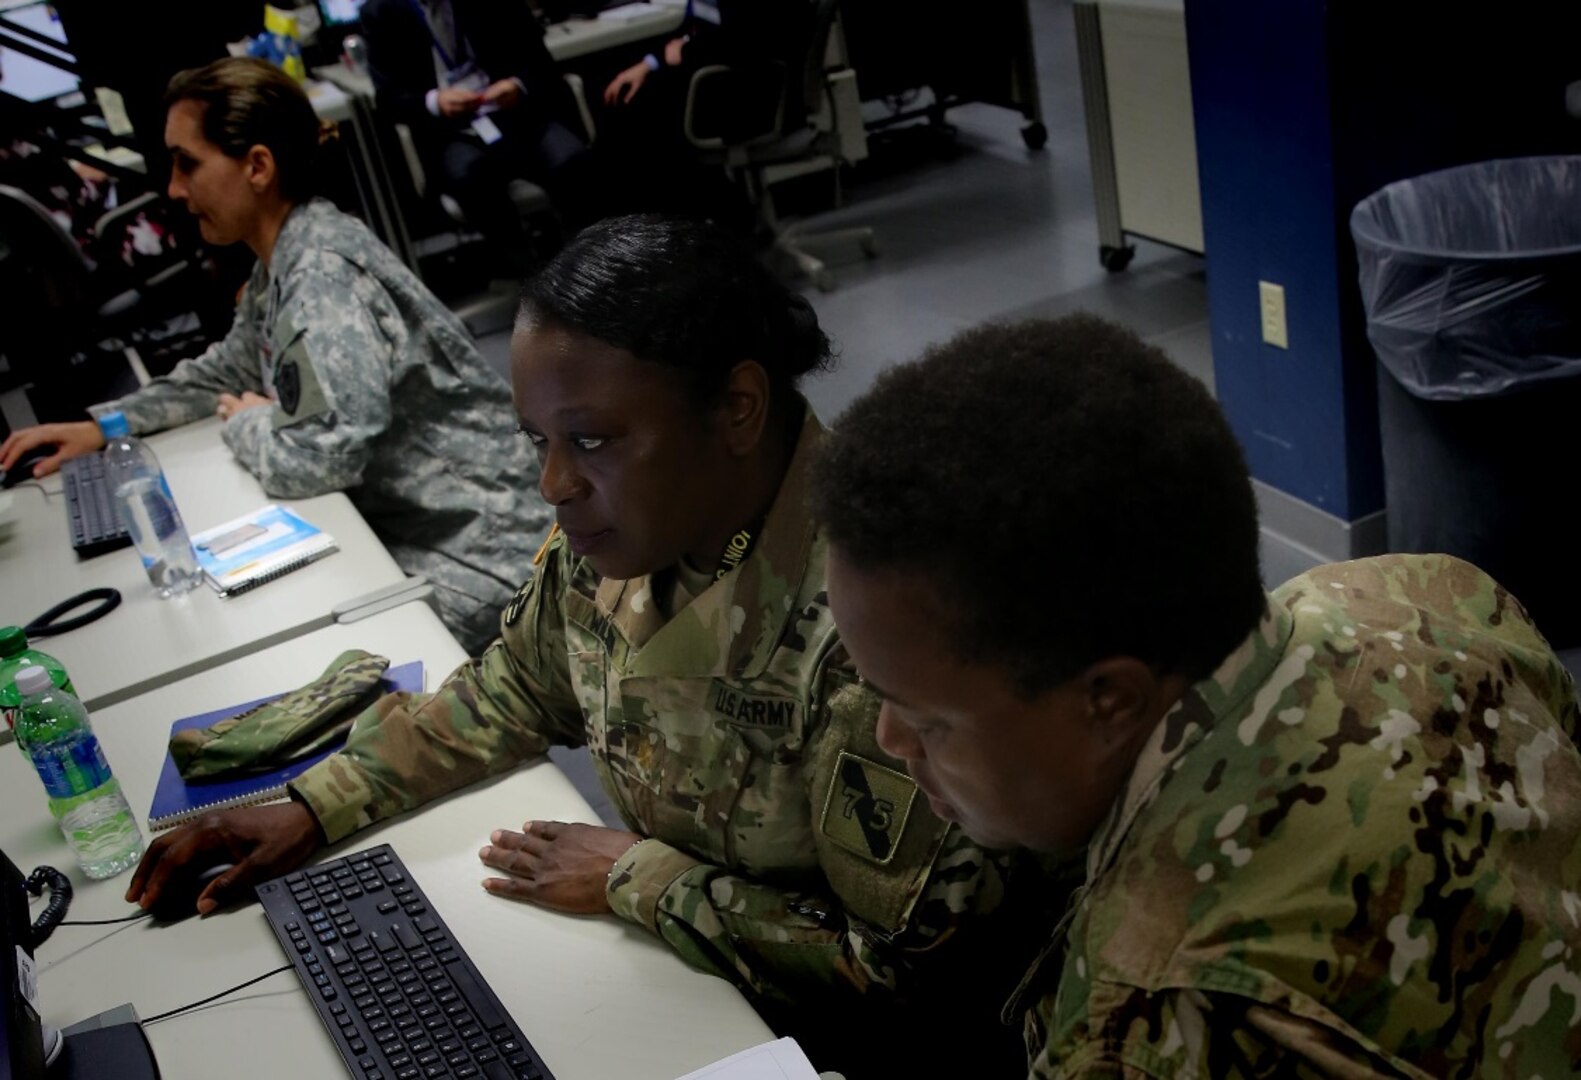 Active duty, reserve and National Guard service members participate in the Cyber Guard and Cyber Flag exercises sponsored by U.S. Cyber Command. The exercises focused on developing coordinated state government, National Guard, commercial enterprise, Defense Department and interagency responses to significant cyberspace-enabled attacks on U.S. domestic critical infrastructure by hostile actors